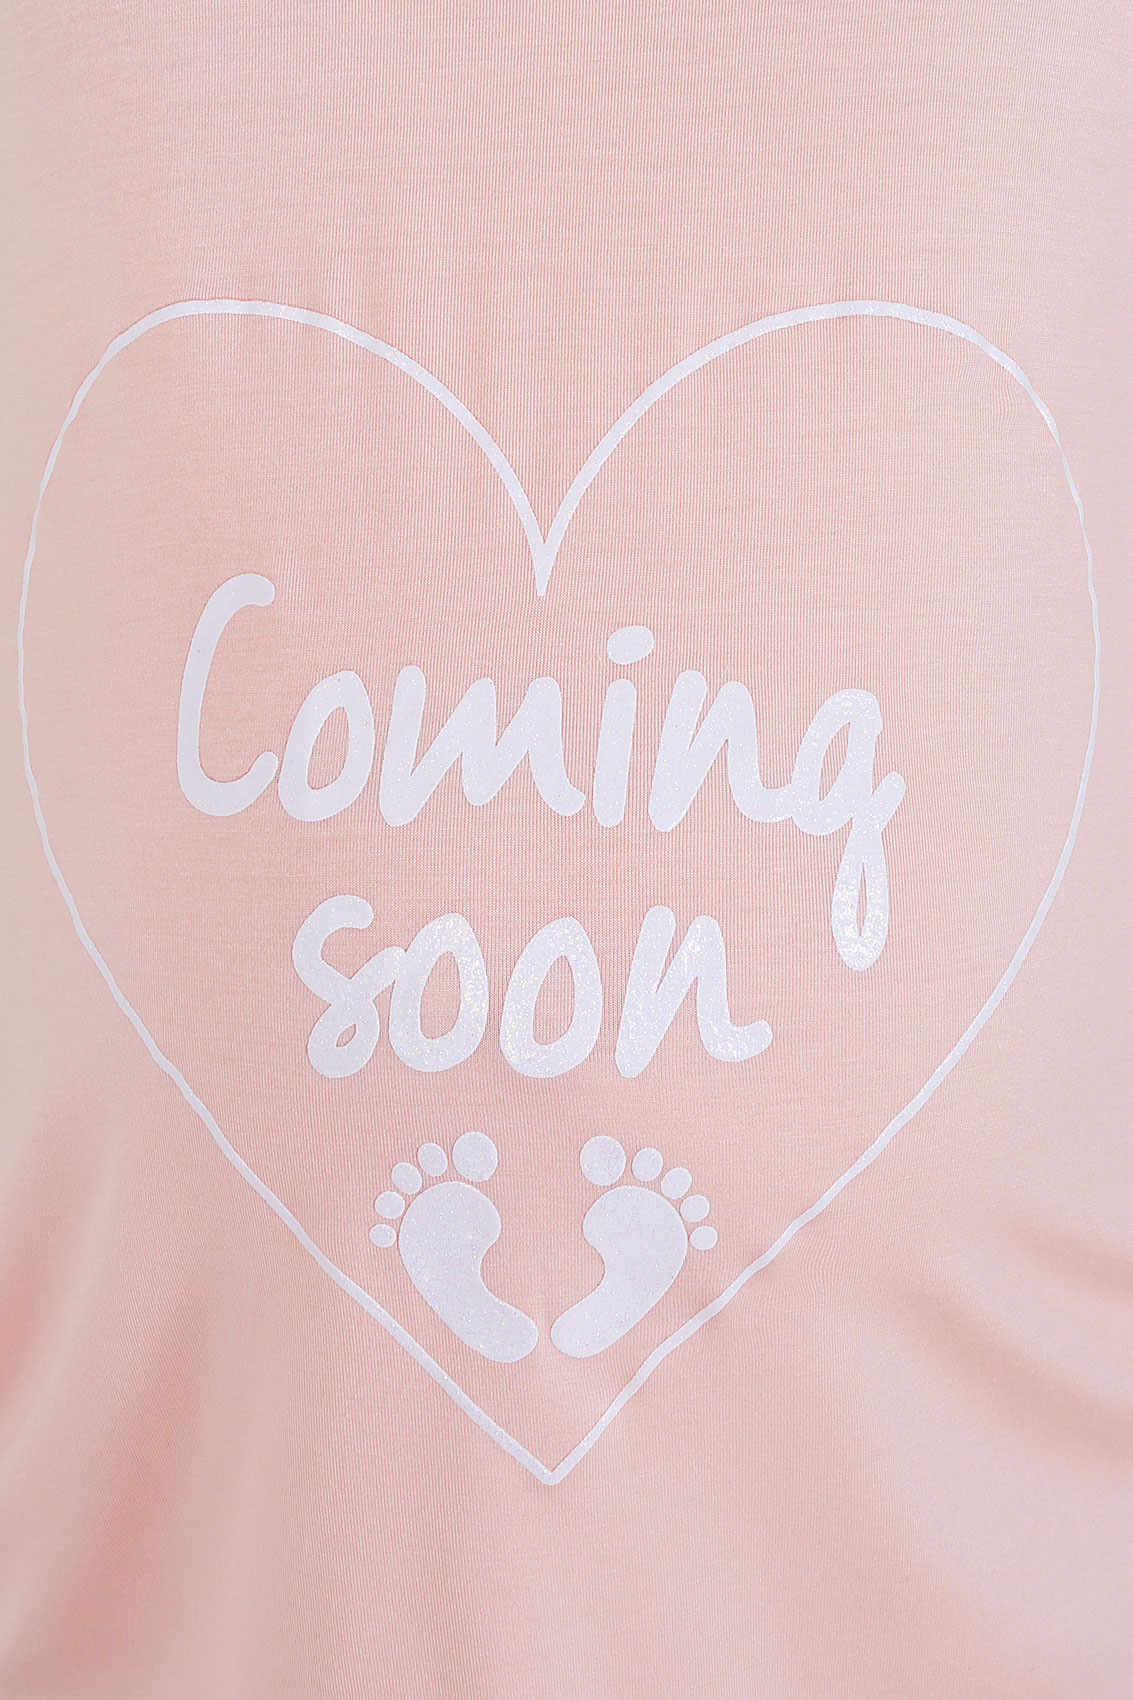 BUMP IT UP MATERNITY Pink 'Coming Soon' Top, Size 16 to 321133 x 1700